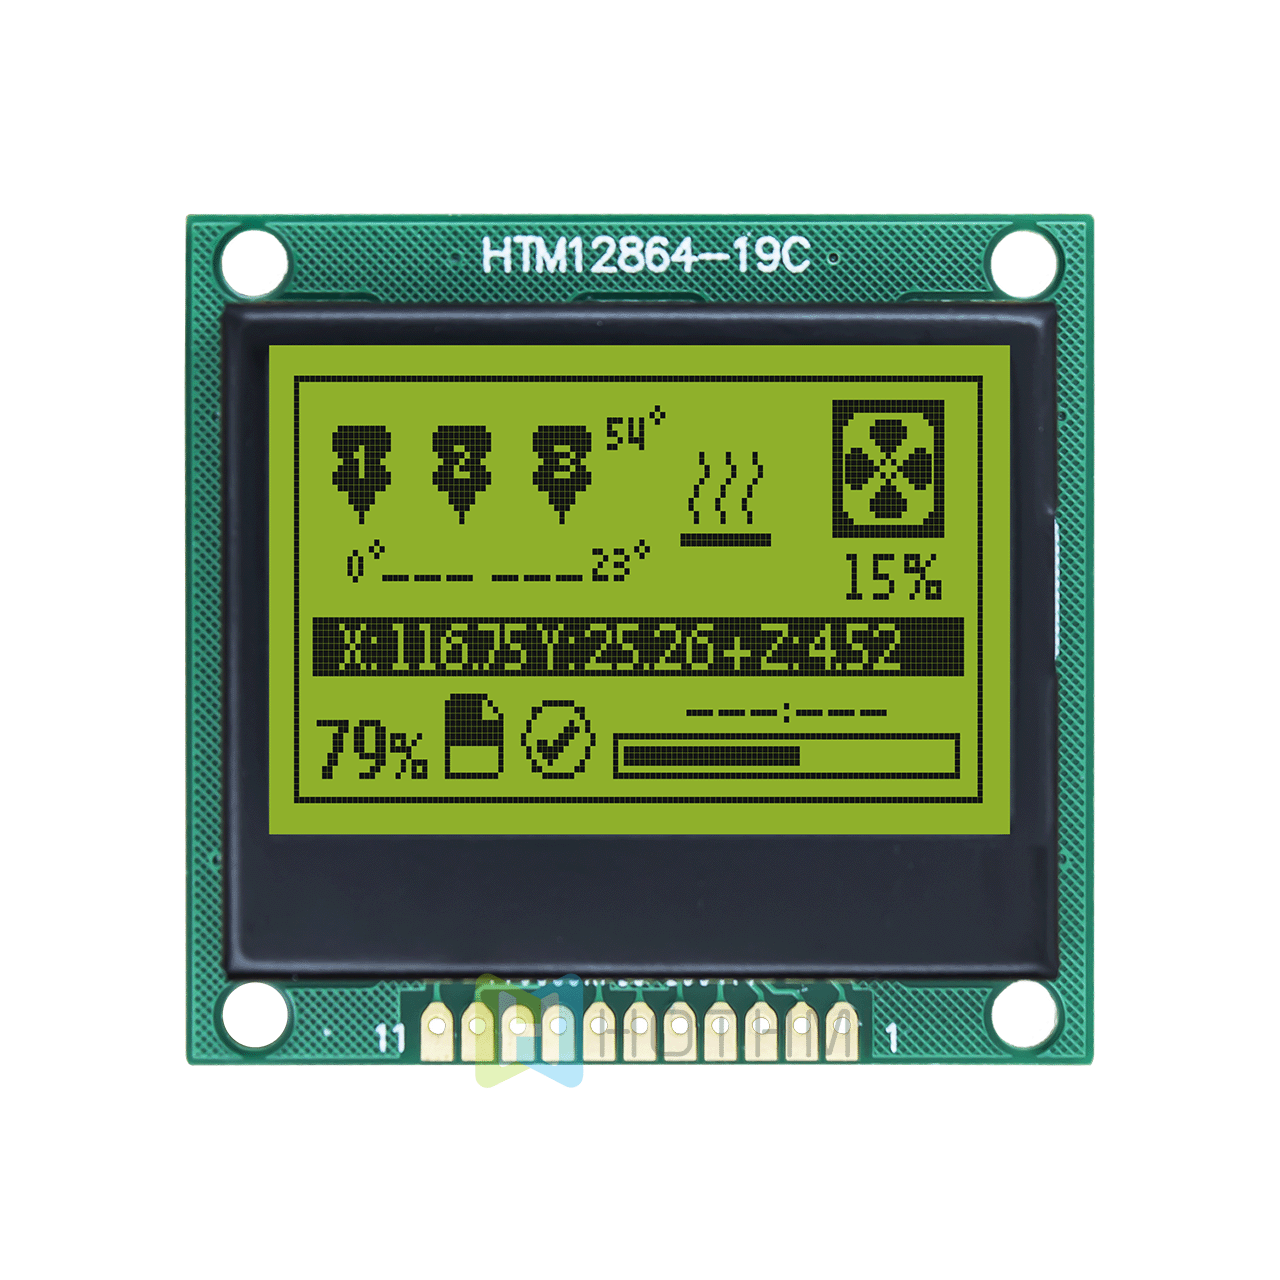 1.7-inch 128 x 64 LCD graphic display | STN front display yellow-green backlight | SPI interface | Adruino